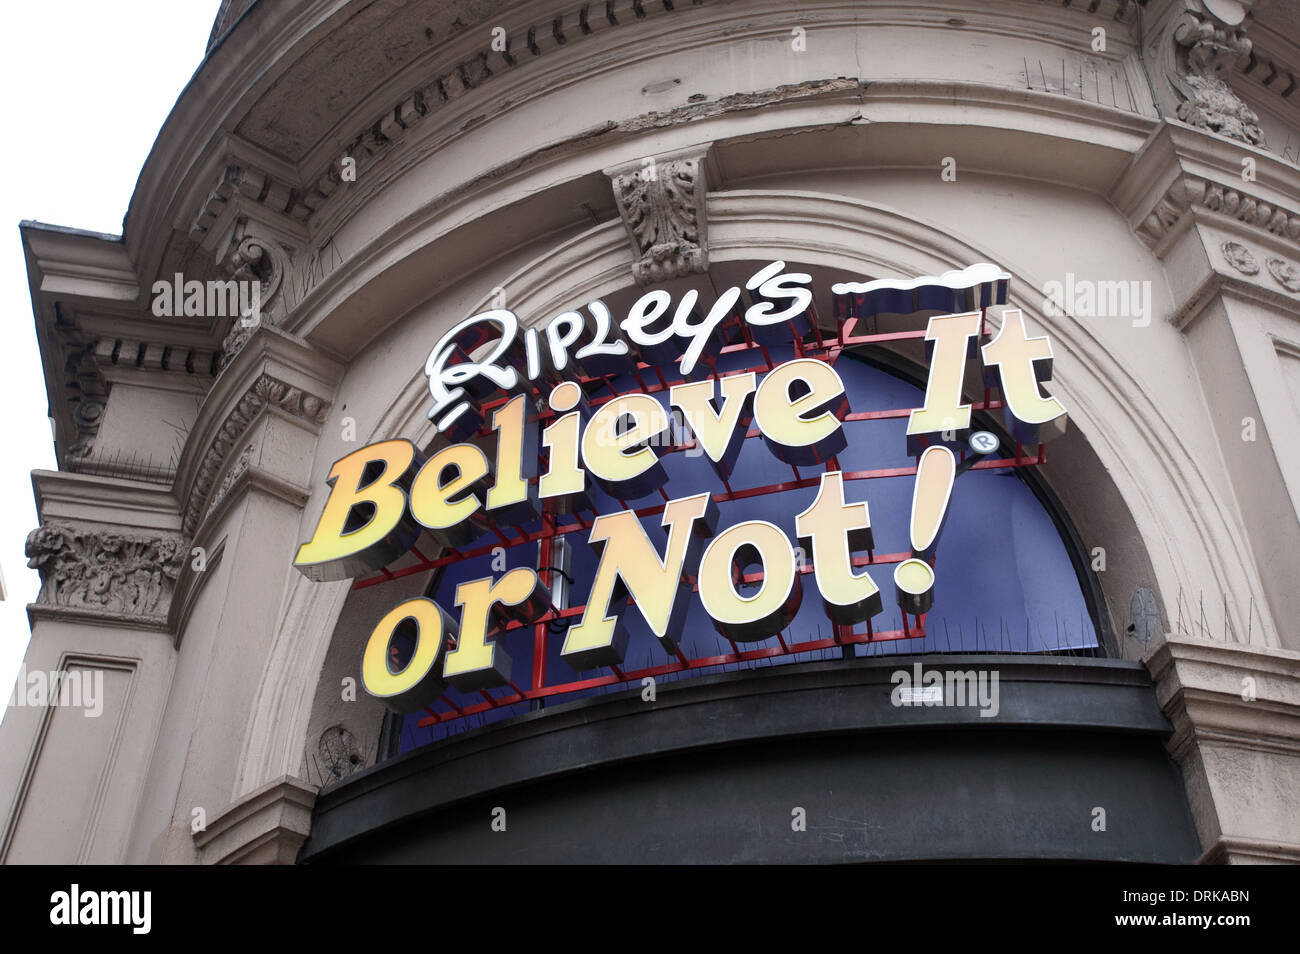 Ripley's Believe it or Not Museum. Piccadilly Circus. Banque D'Images